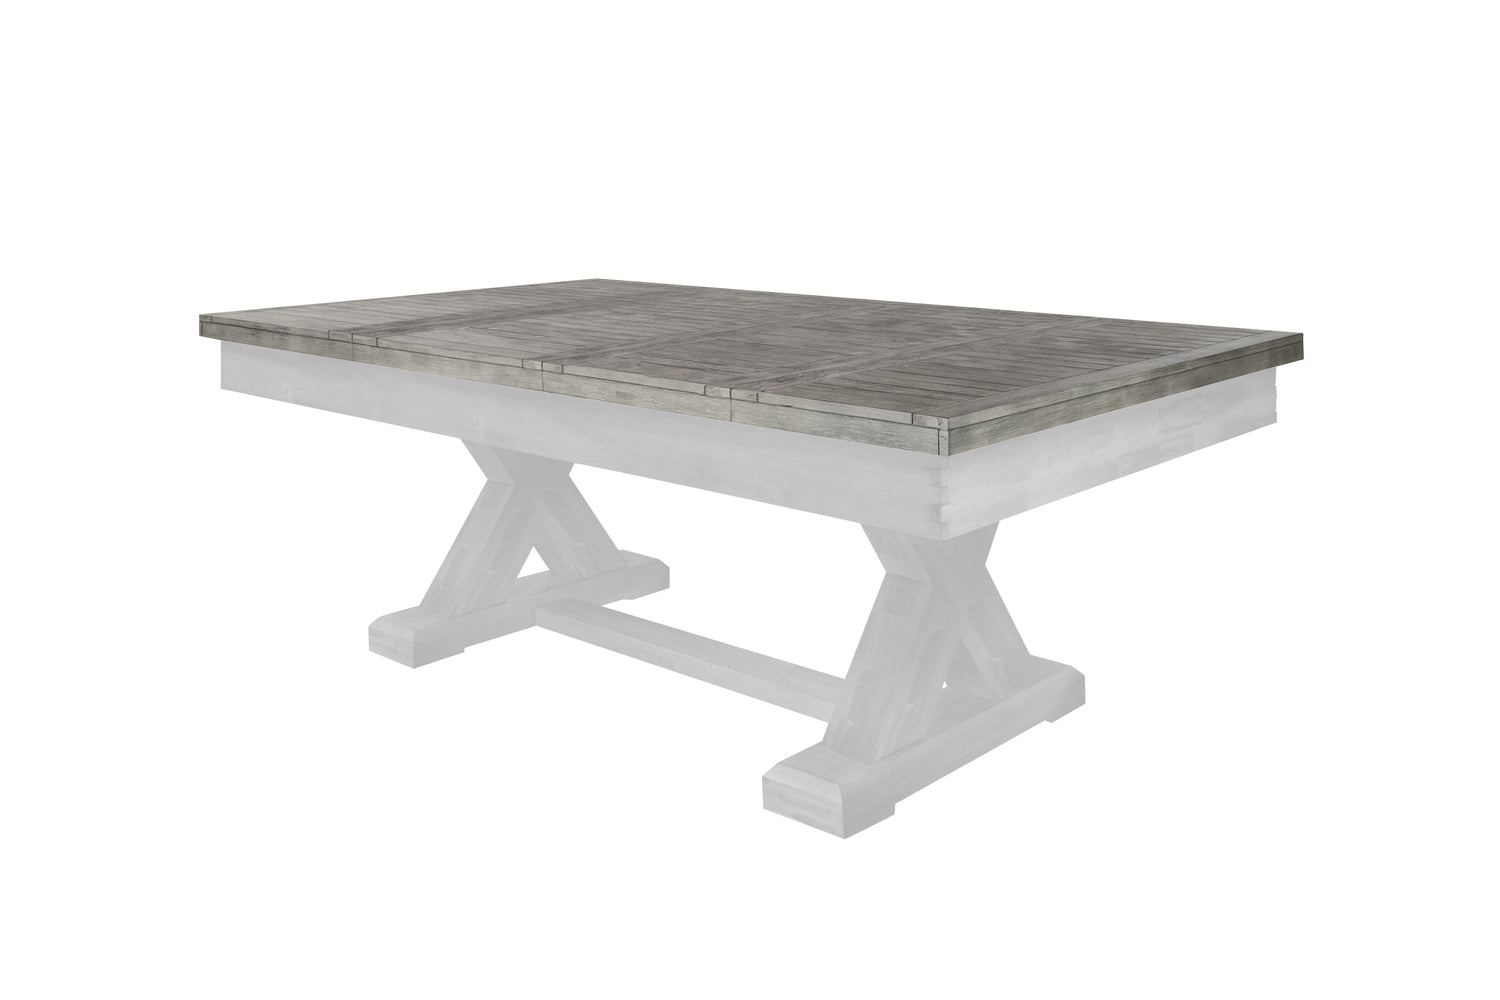 Legacy Billiards 8 Ft Outdoor Dining Top in Ash Grey Finish